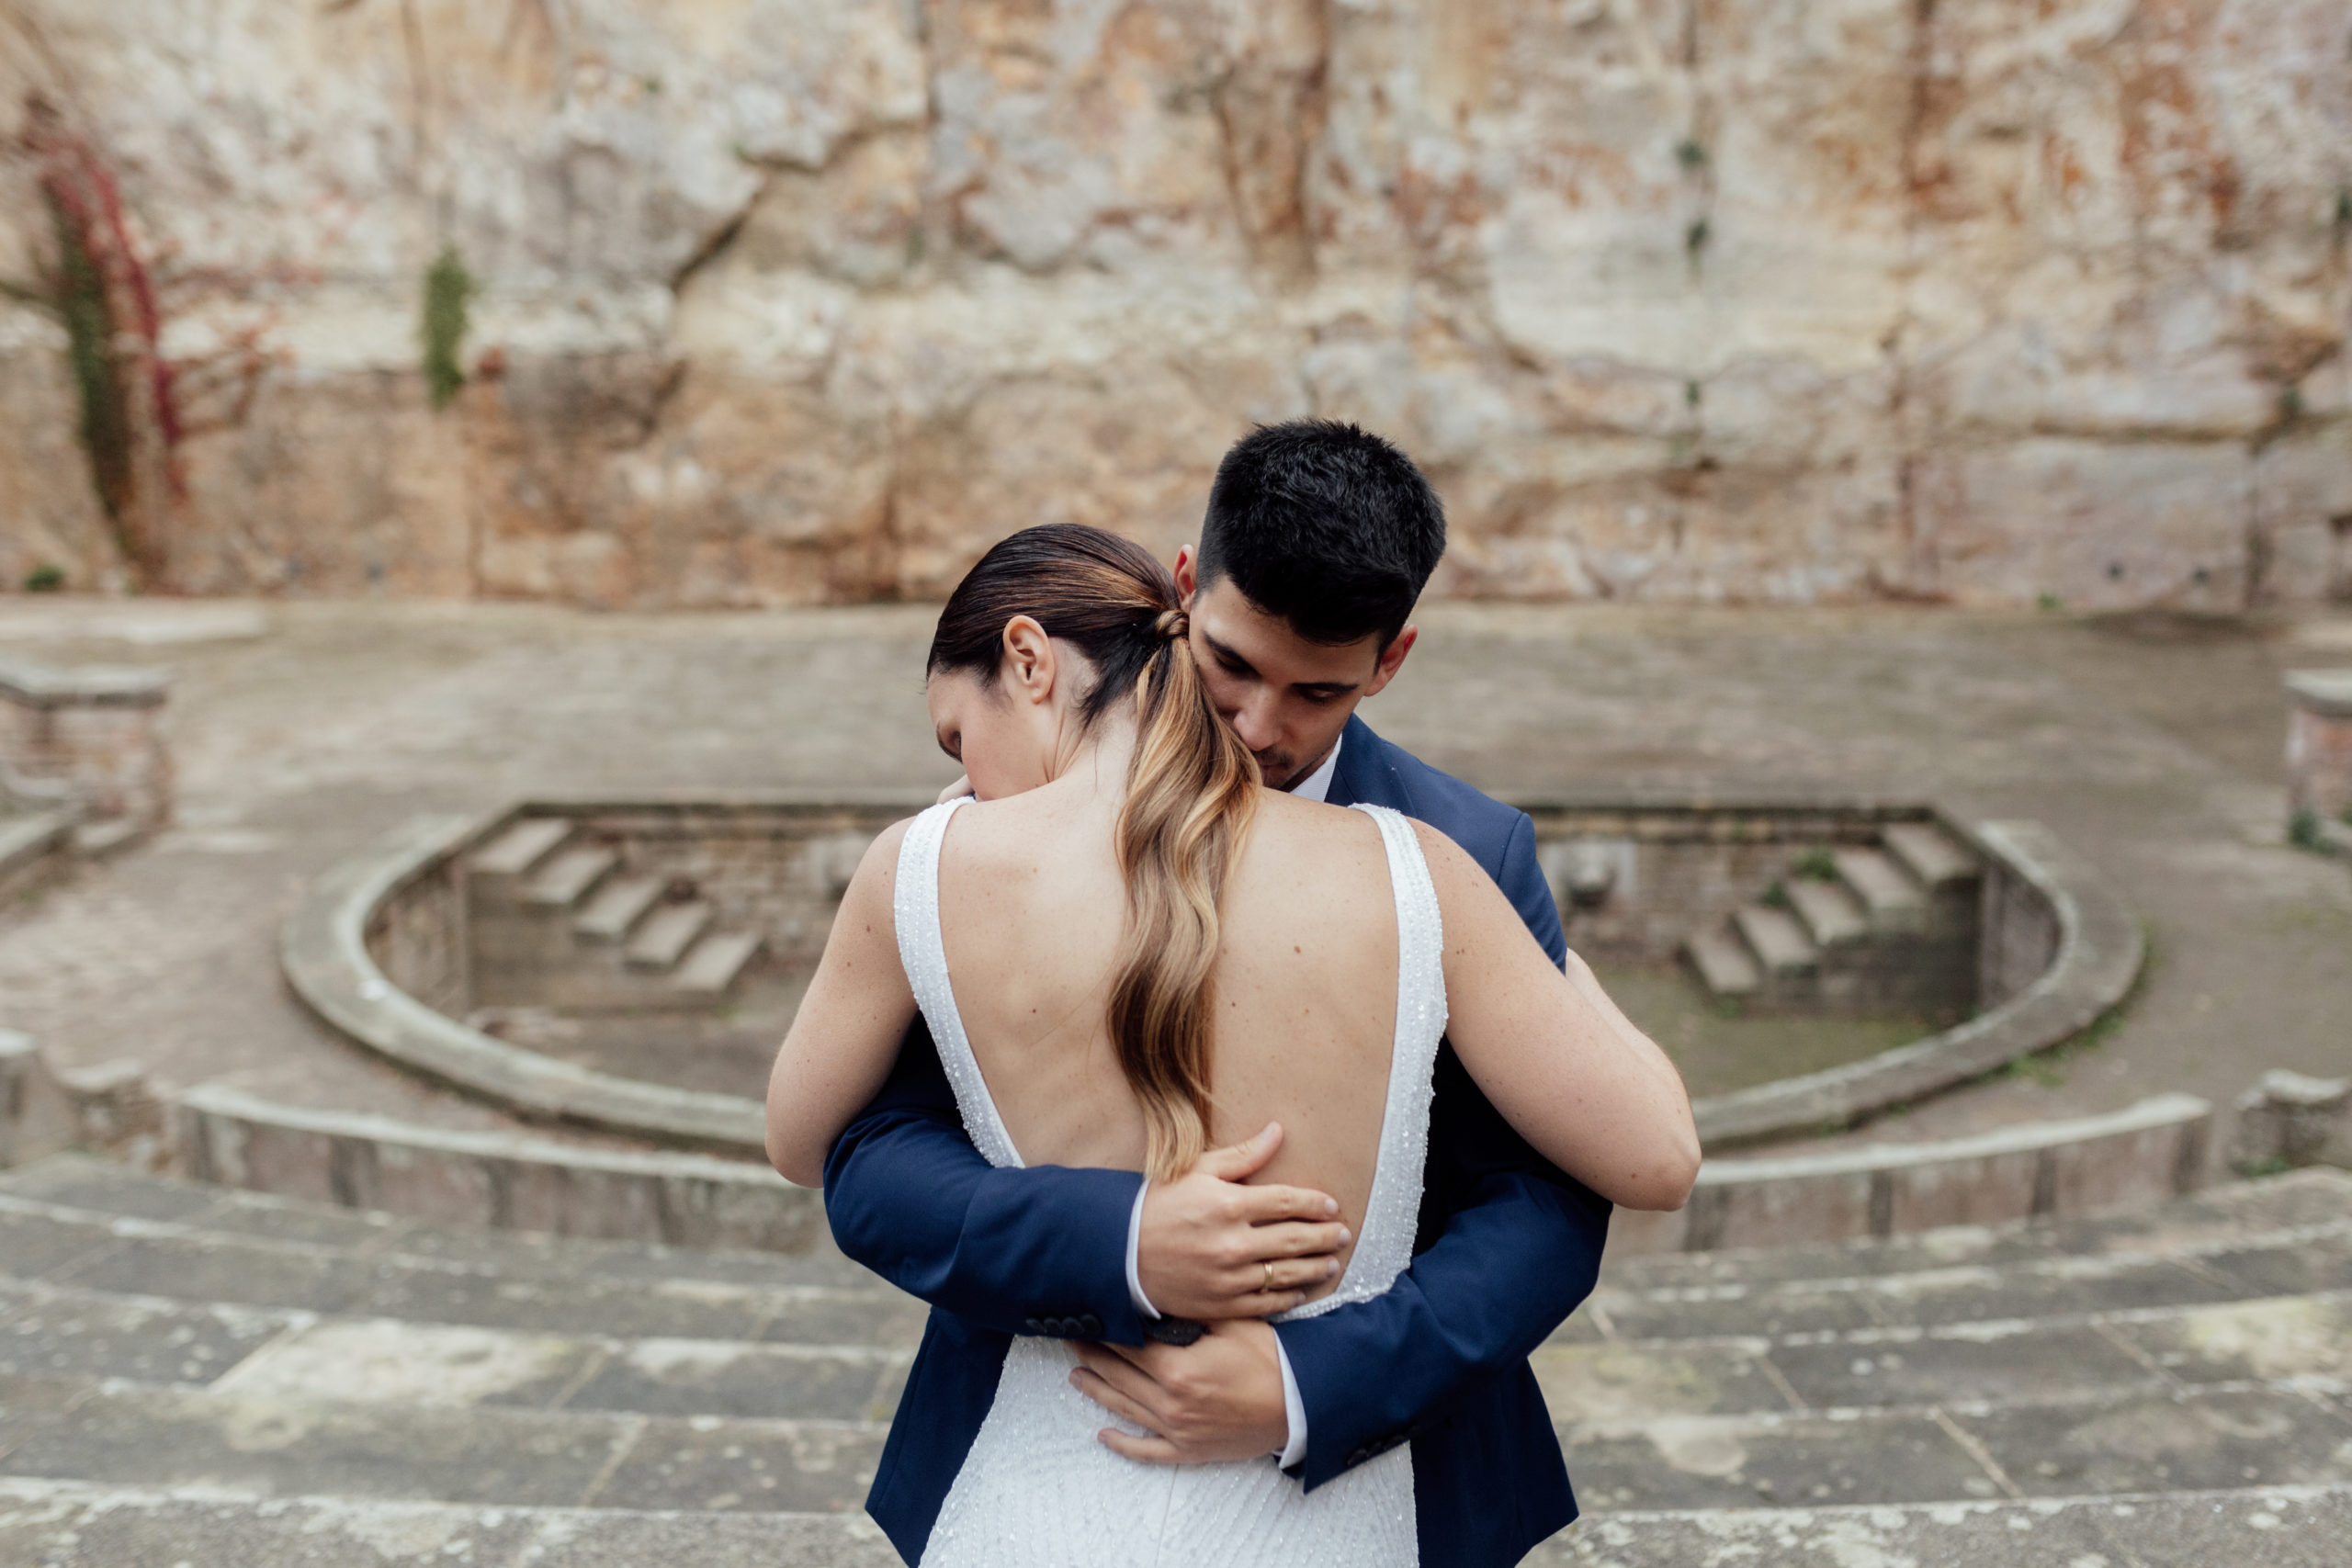 Barcelona City Autumn Wedding Elopement at Teatre Grec. An open-air theatre in the Montjuïc hill in Barcelona, Catalonia, Spain. By English photographer Hannah Hutchins